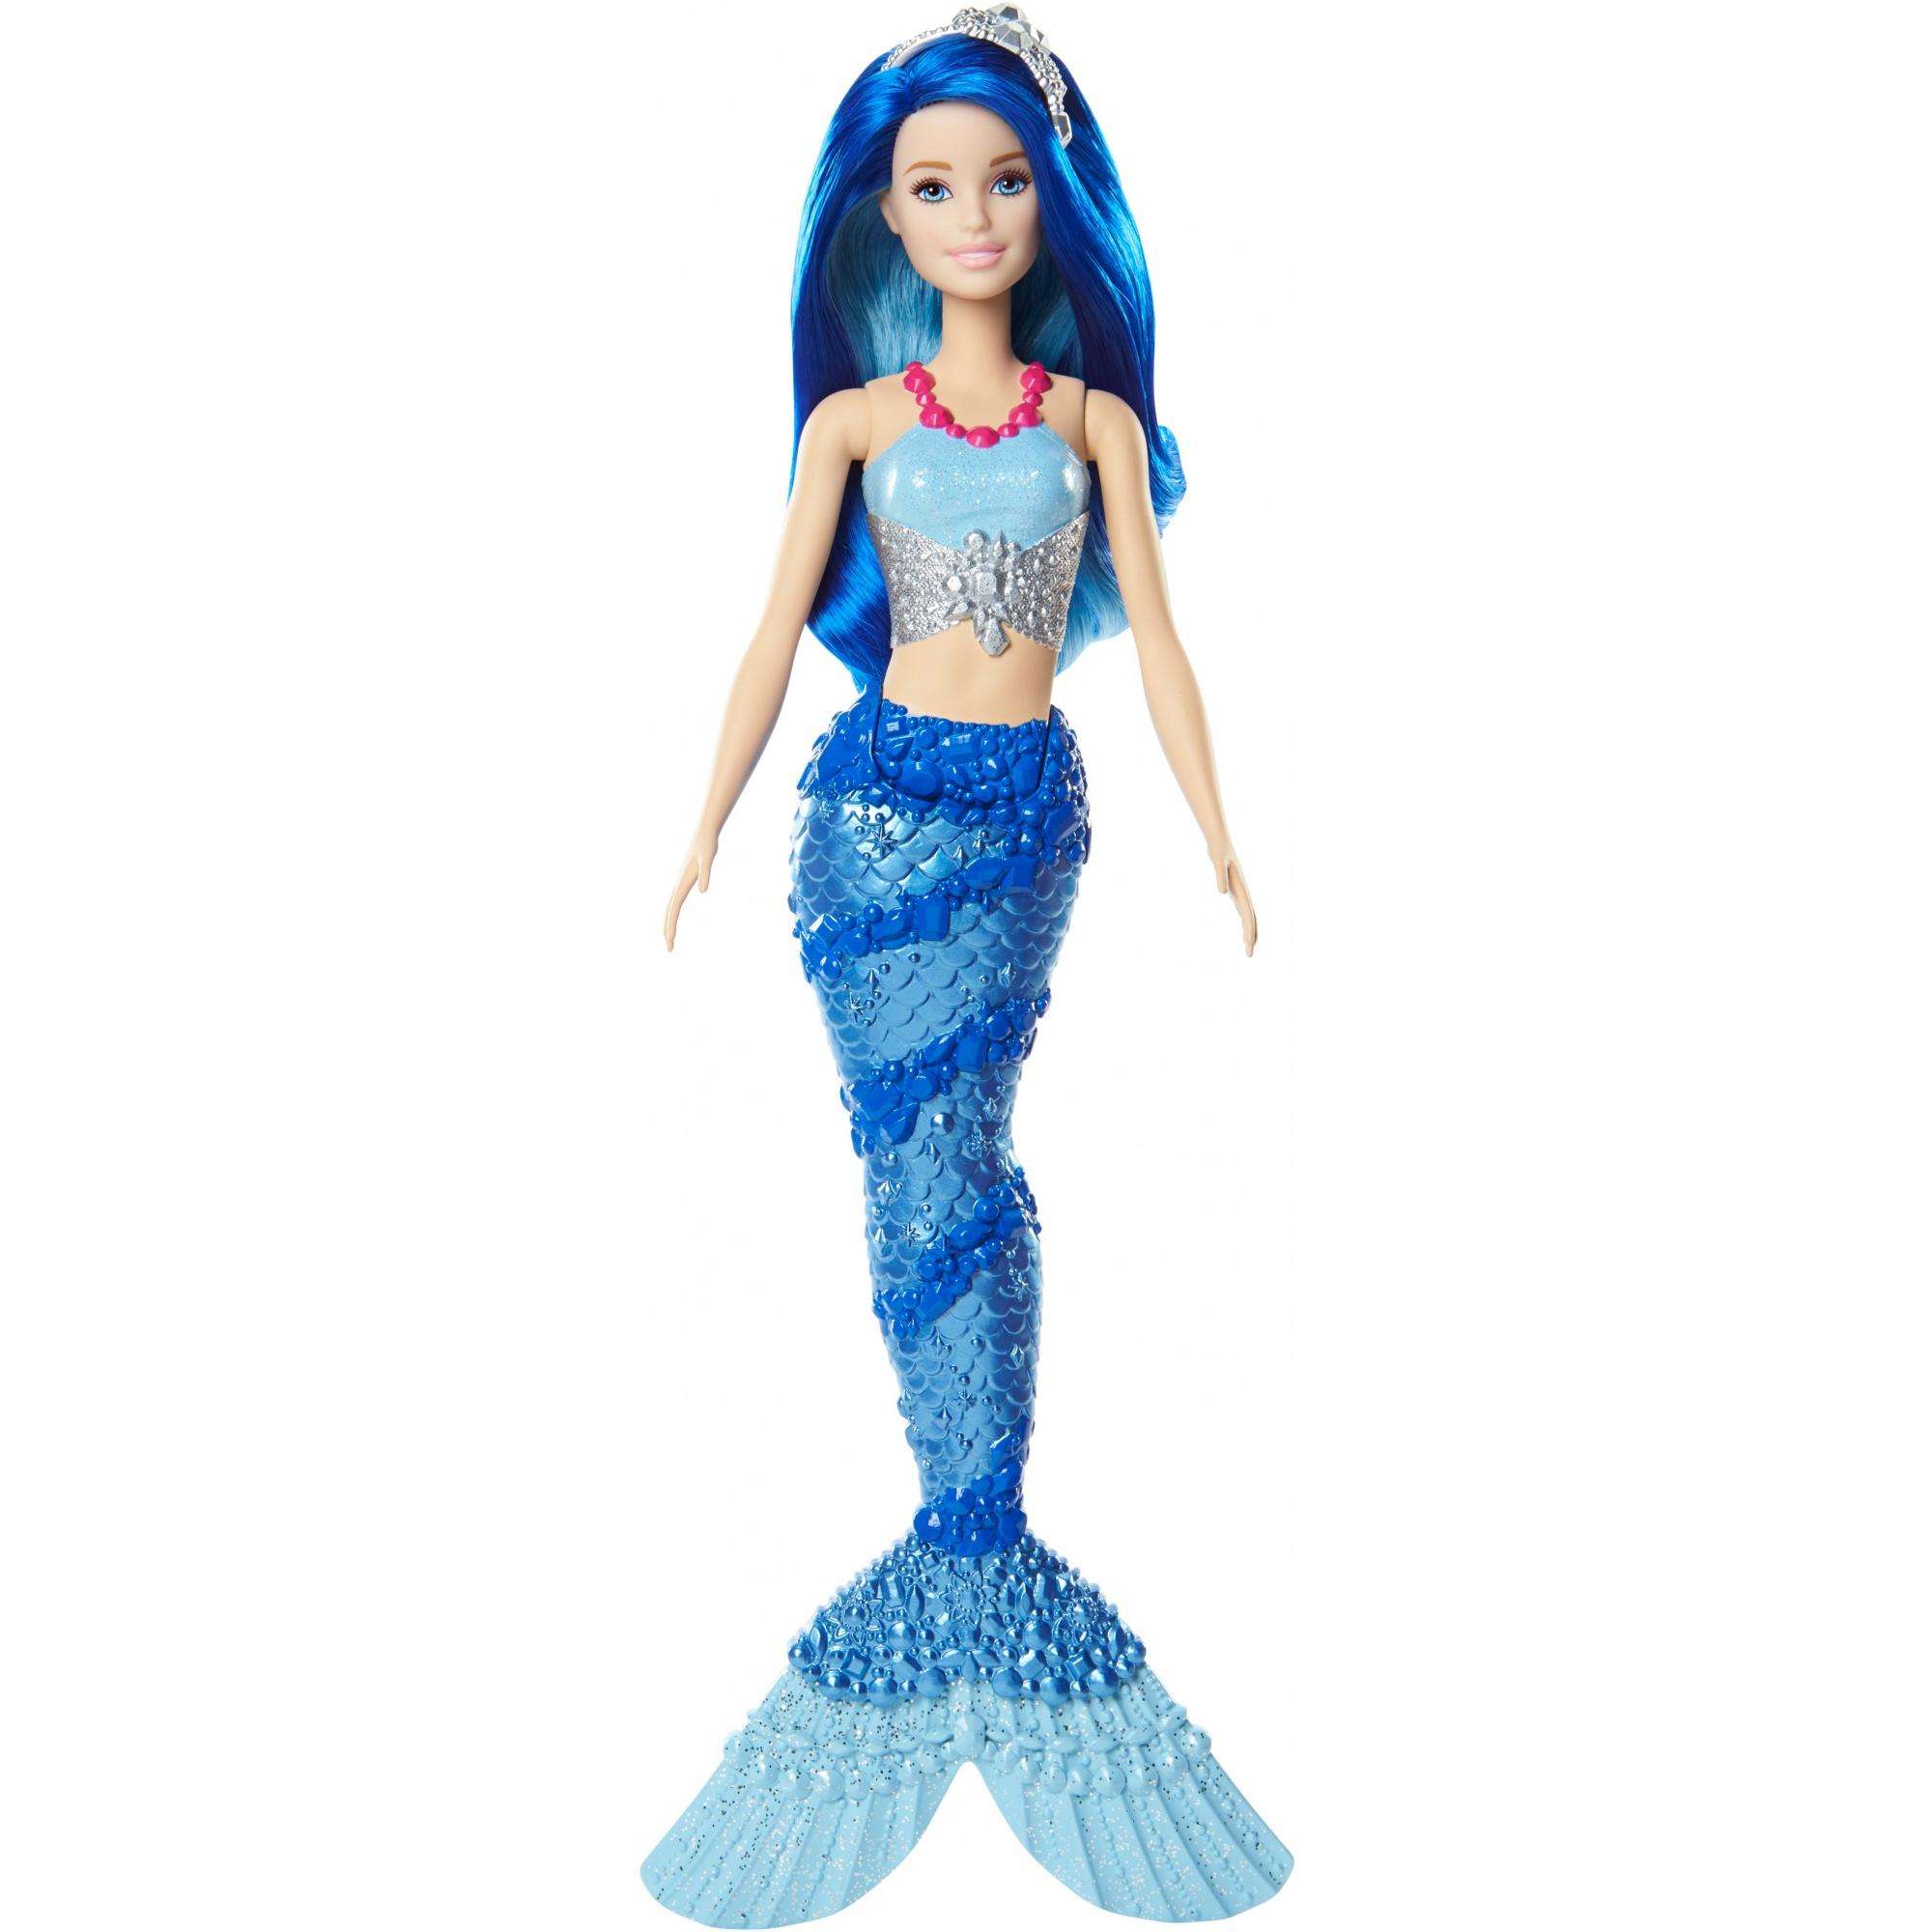 Barbie Dreamtopia Mermaid Doll with Blue Jewel-Themed Tail - image 1 of 5